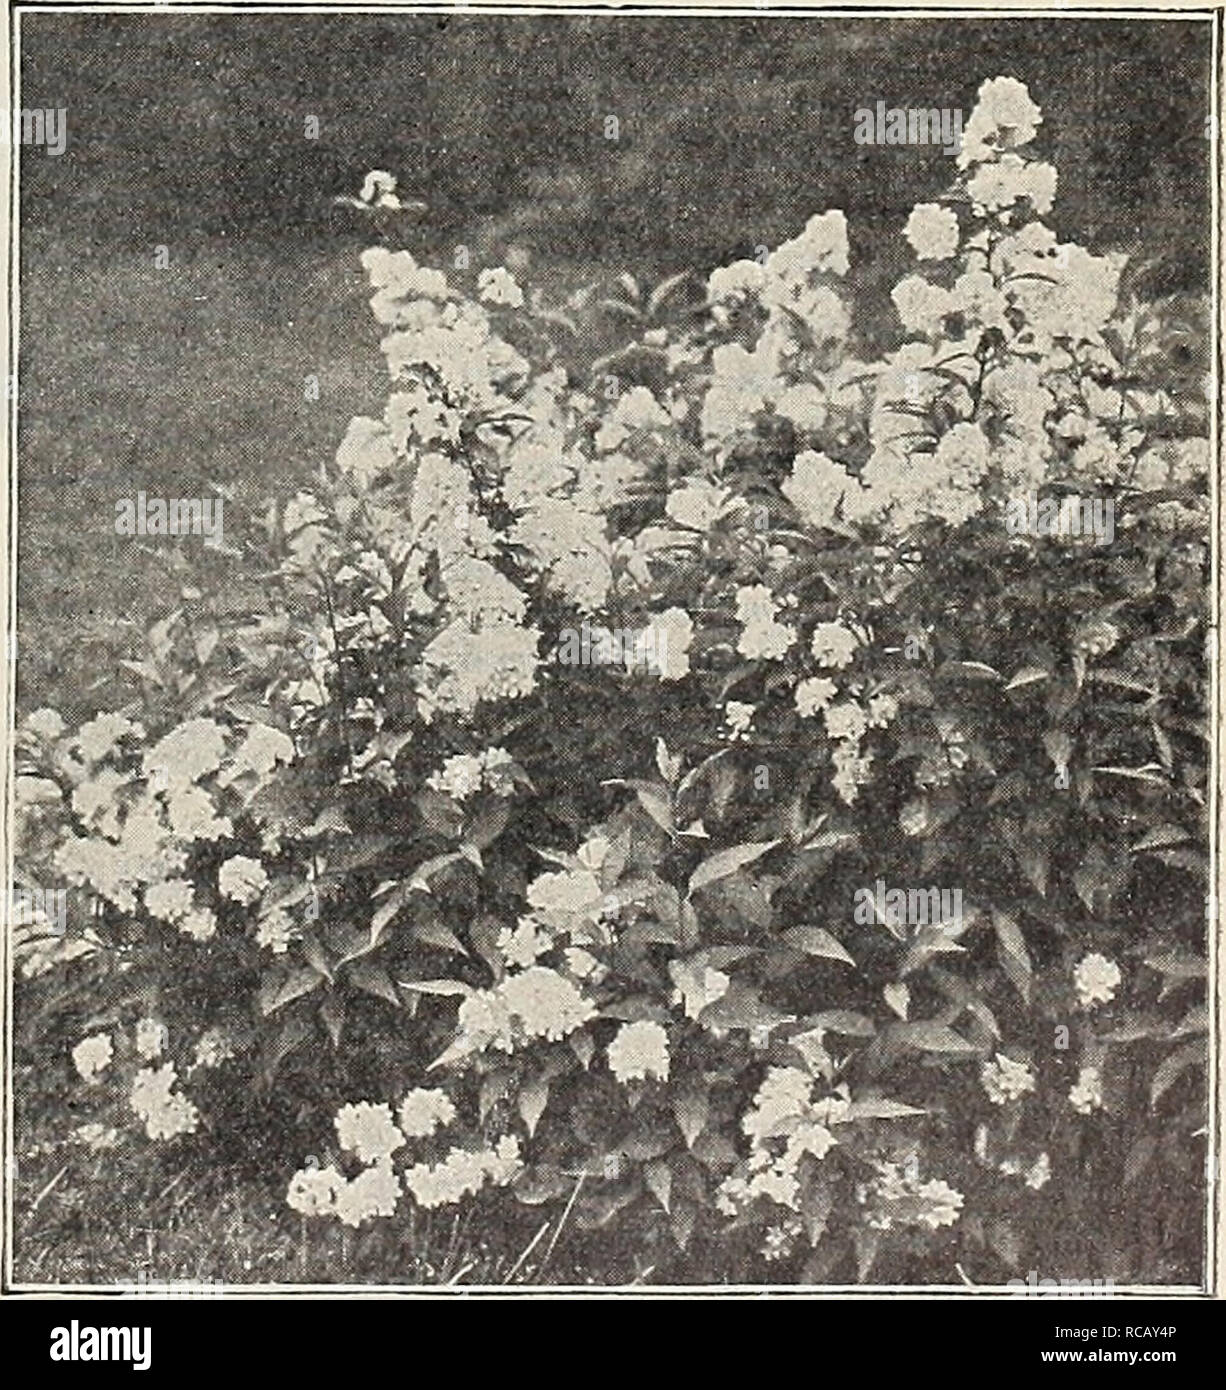 . Dreer's garden book : 1906. Seeds Catalogs; Nursery stock Catalogs; Gardening Equipment and supplies Catalogs; Flowers Seeds Catalogs; Vegetables Seeds Catalogs; Fruit Seeds Catalogs. • V HvDKANGKA PaNICULATA GraNDIFLORA. Deutzia Candidissima plena. A fine double white. — Crenata rosea plena {DozMe-flowering Deutzta). Yo- ers double-white, linged with pink ; very desirable. — Qracilis. A dwarf bush, covered with spikes of pure white flowers in early summer. Campanulata. . new white sort, with large, open, salver-shaped flowers. Rosea. Flowers twice the size of D. gracilis and suf fused w Stock Photo